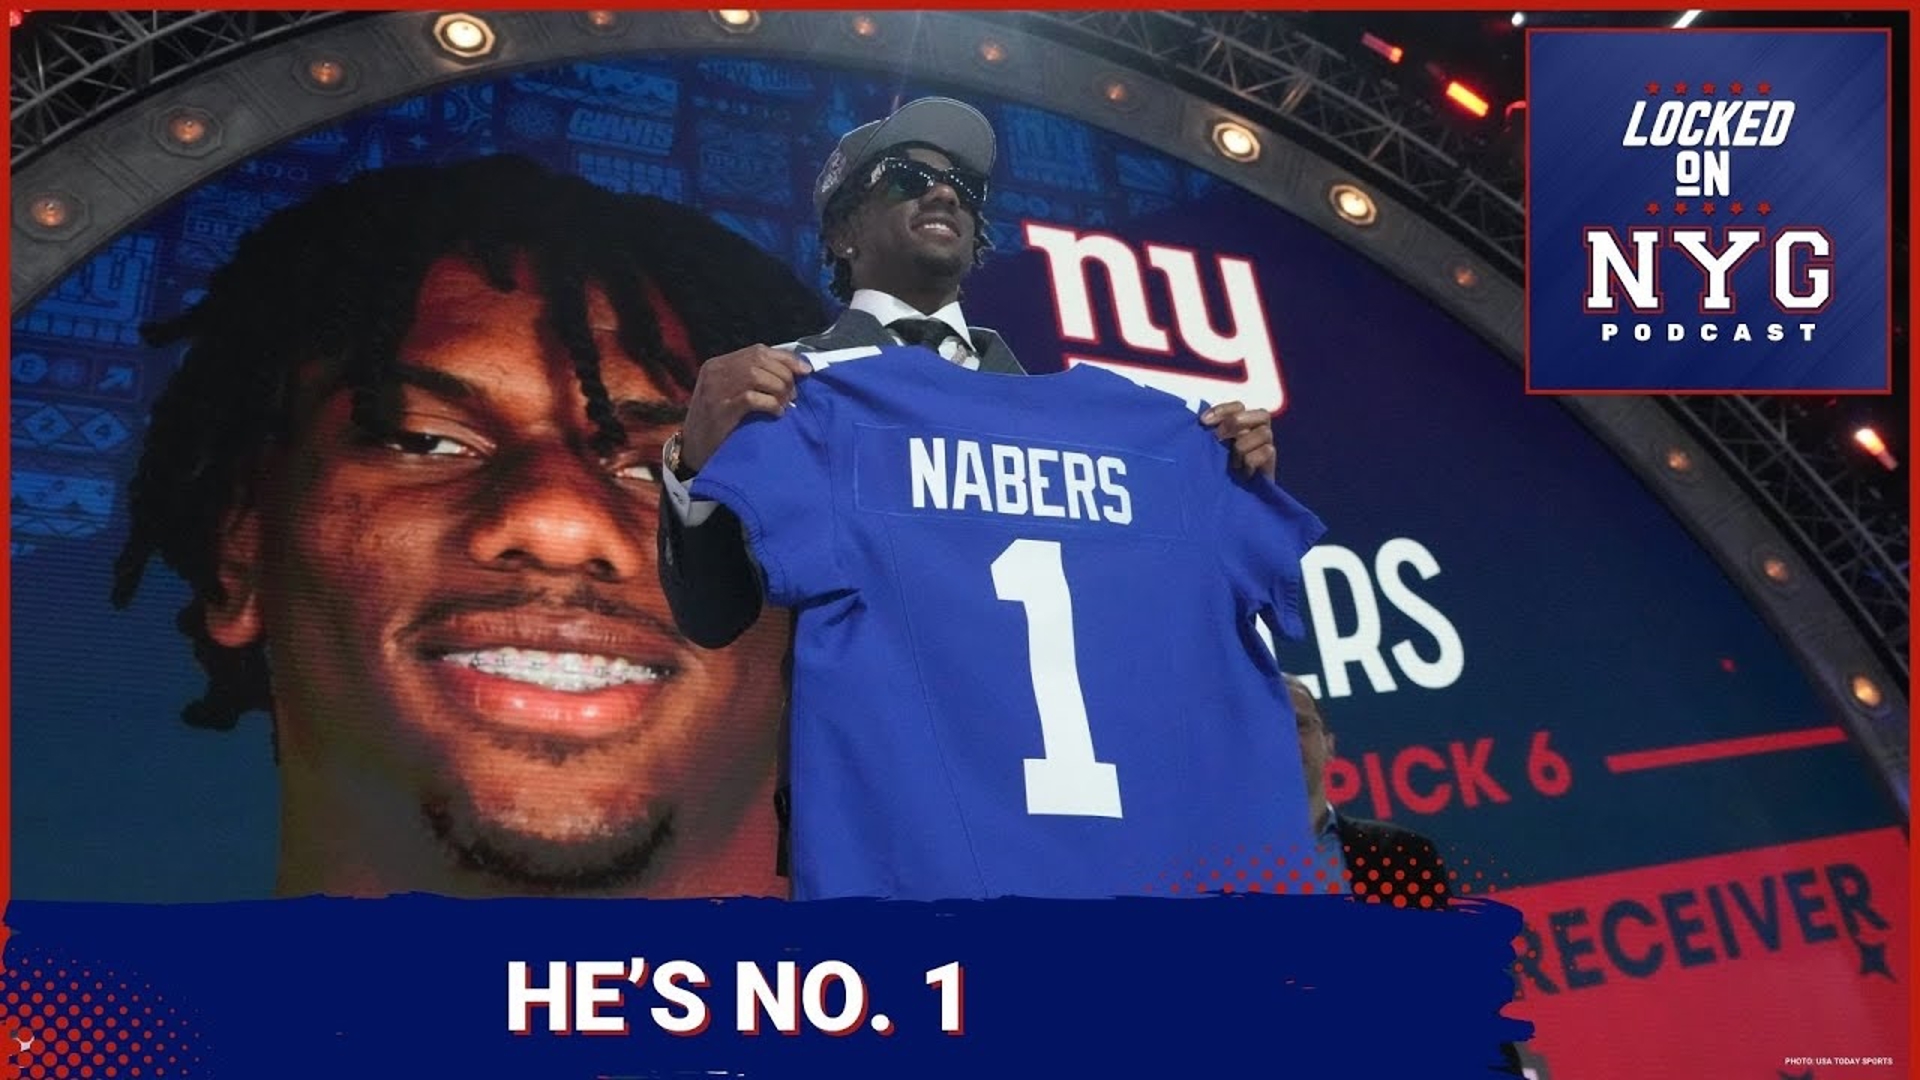 The New York Giants pick is in: LSU receiver Malik Nabers. We break down what Nabers brings to the table and discuss why he was the right choice for the Giants.